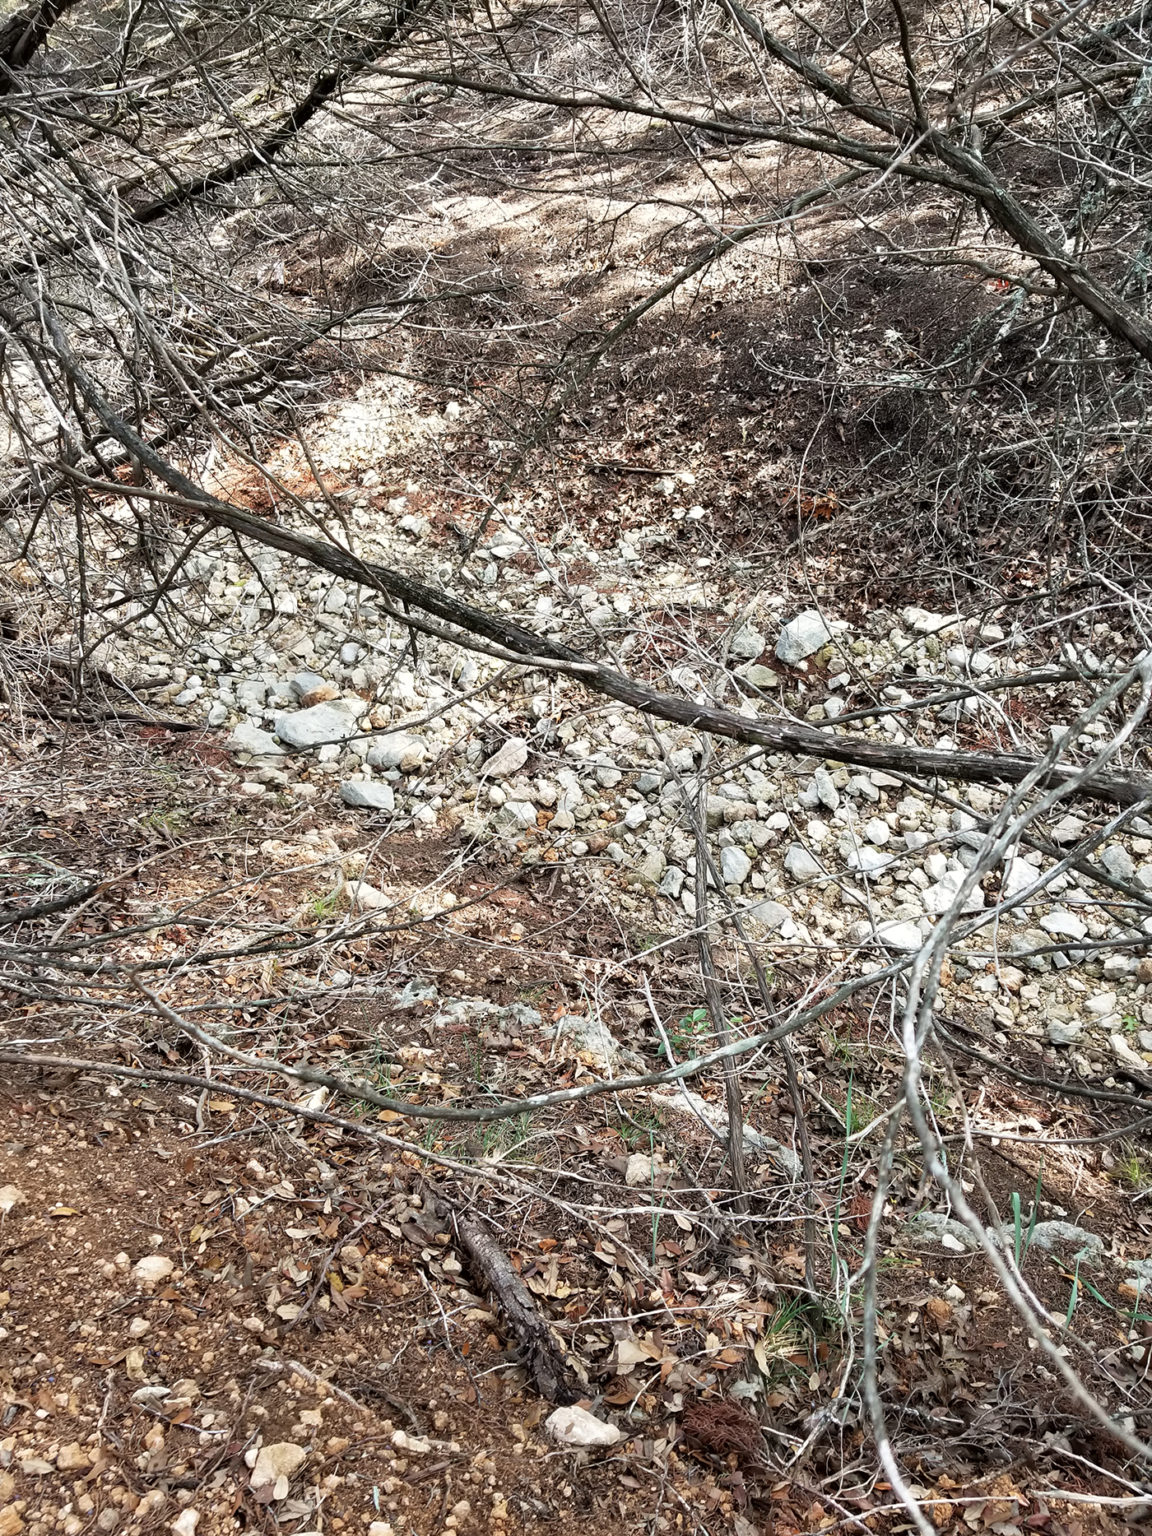 At the lower end of the Creek Trail, the creek bed is all stone. These are the rocks the fast flowing water brought down from above that dropped to the bottom when the water slowed down. Note the bed is wider and shallower here.